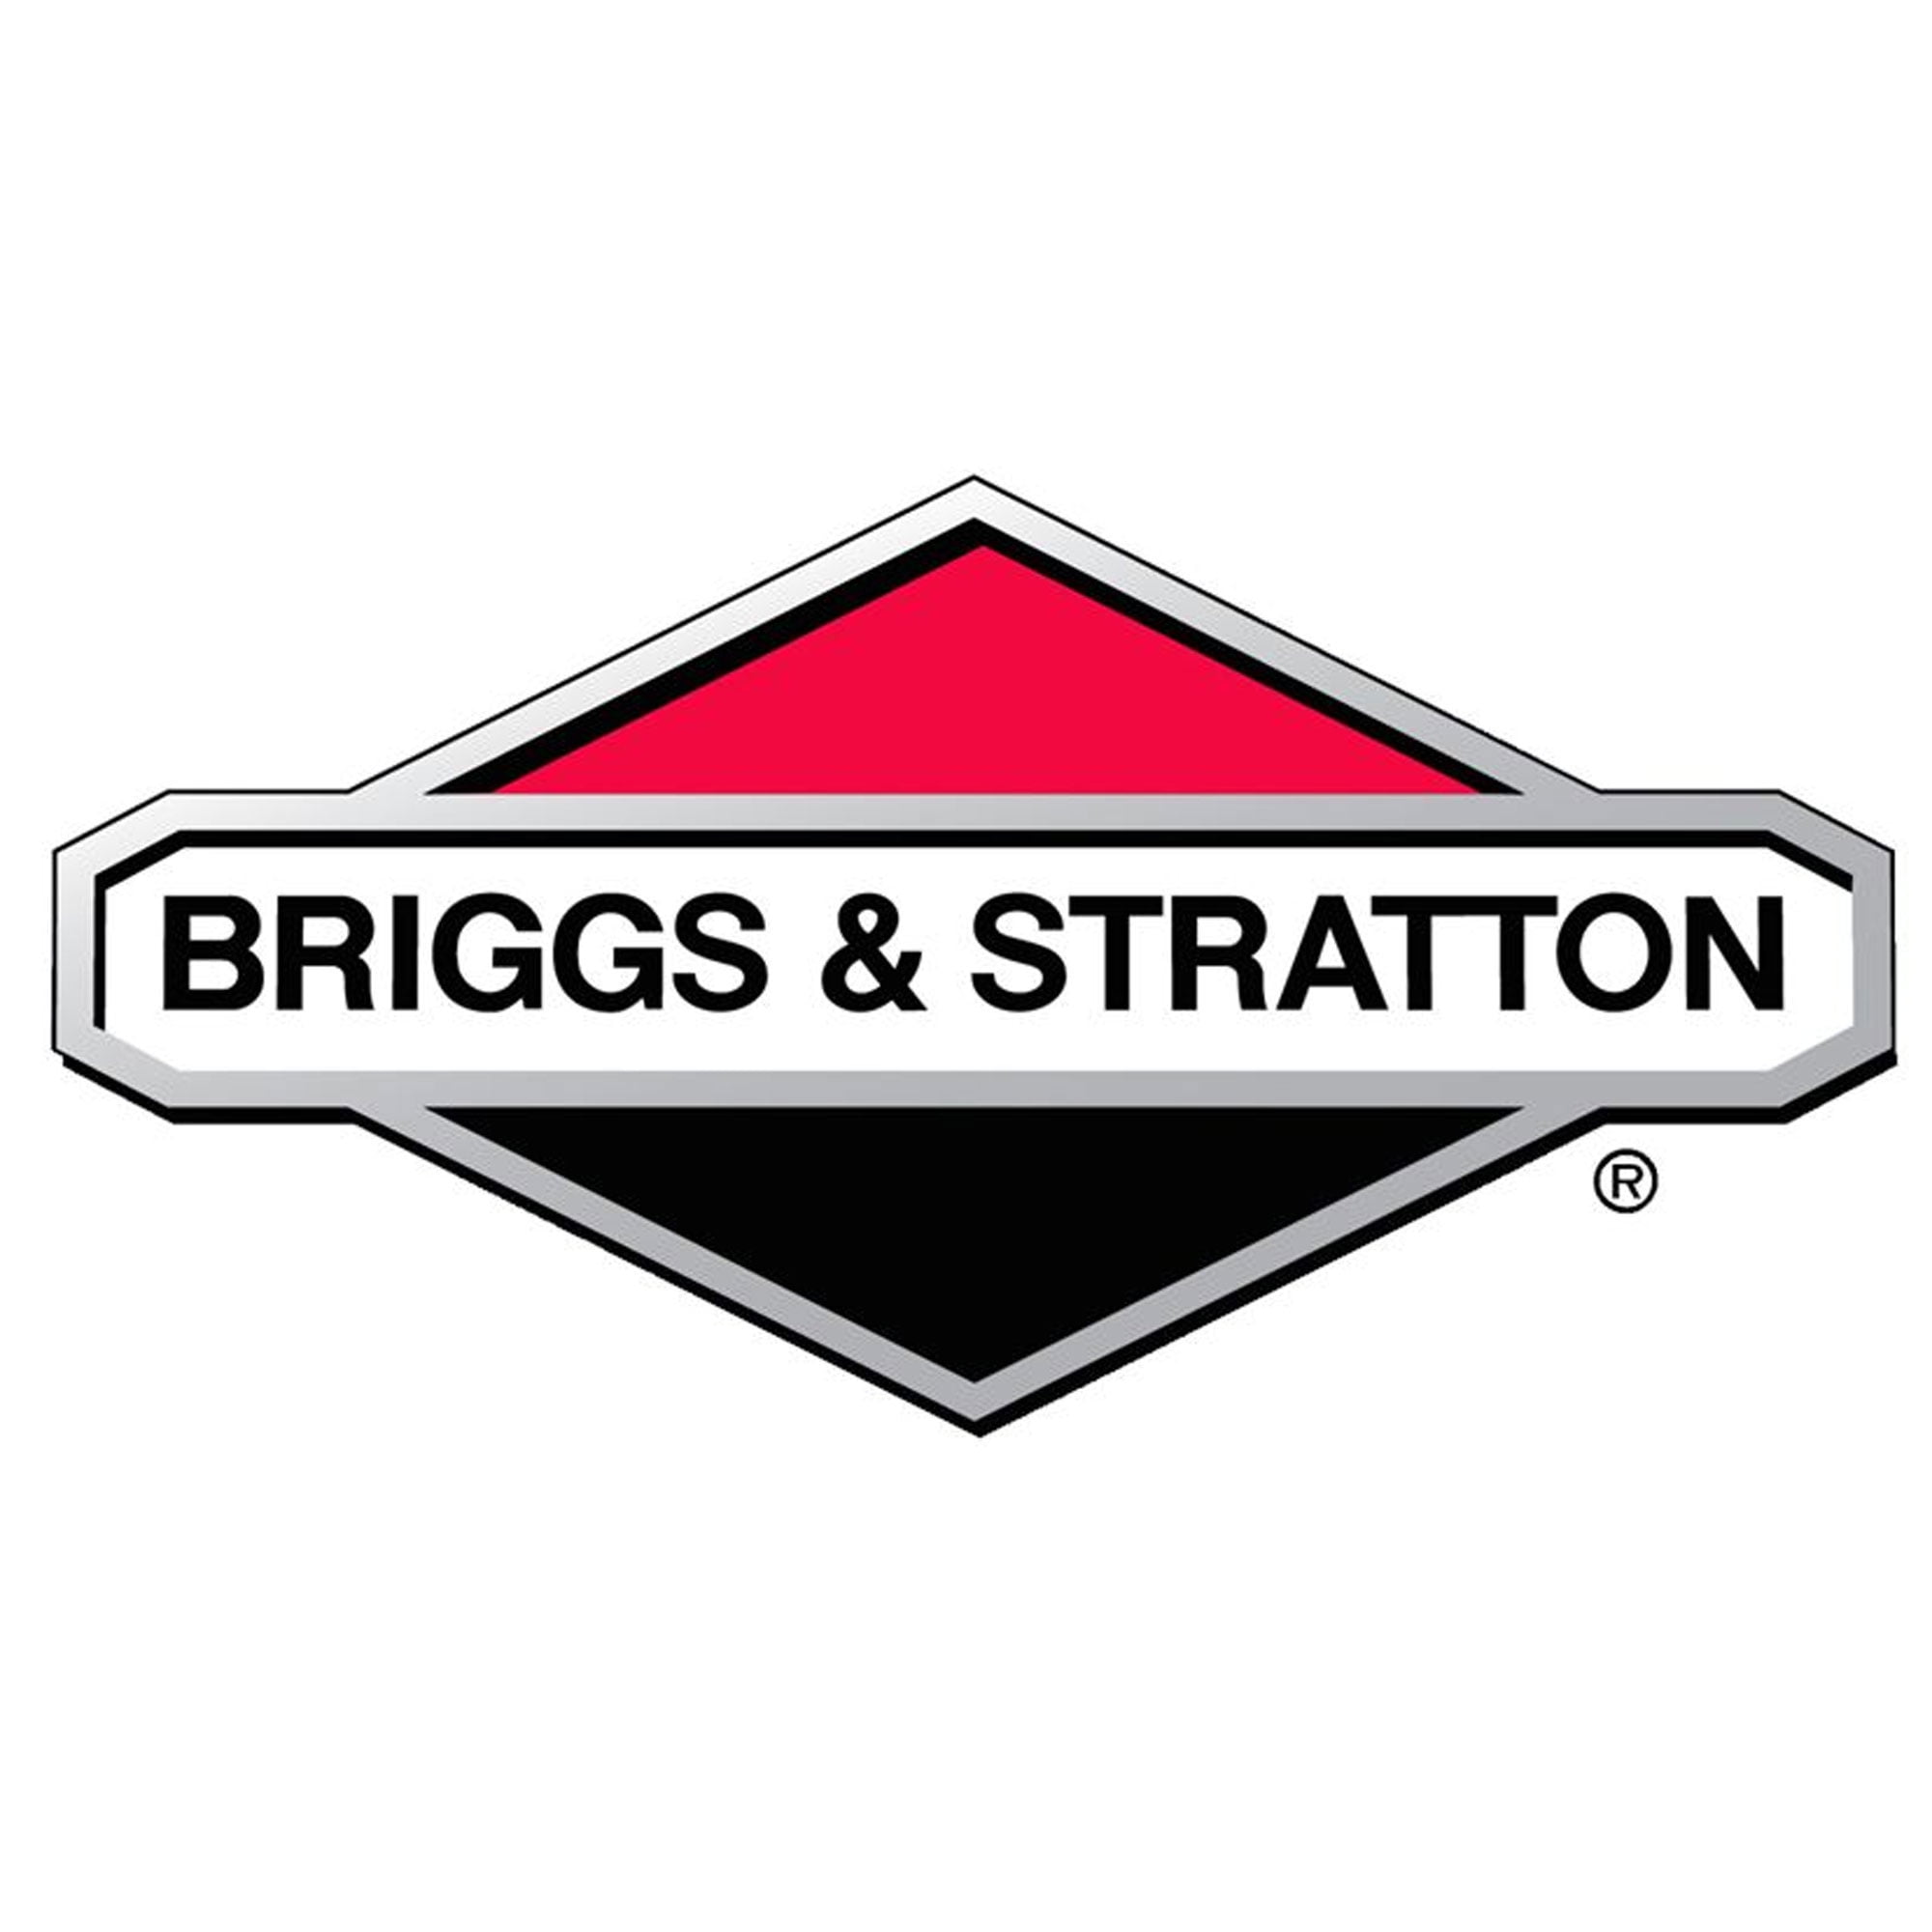 Briggs and Stratton 2 Pack Of Genuine OEM Replacement Fuel Pumps # 07-700-2PK